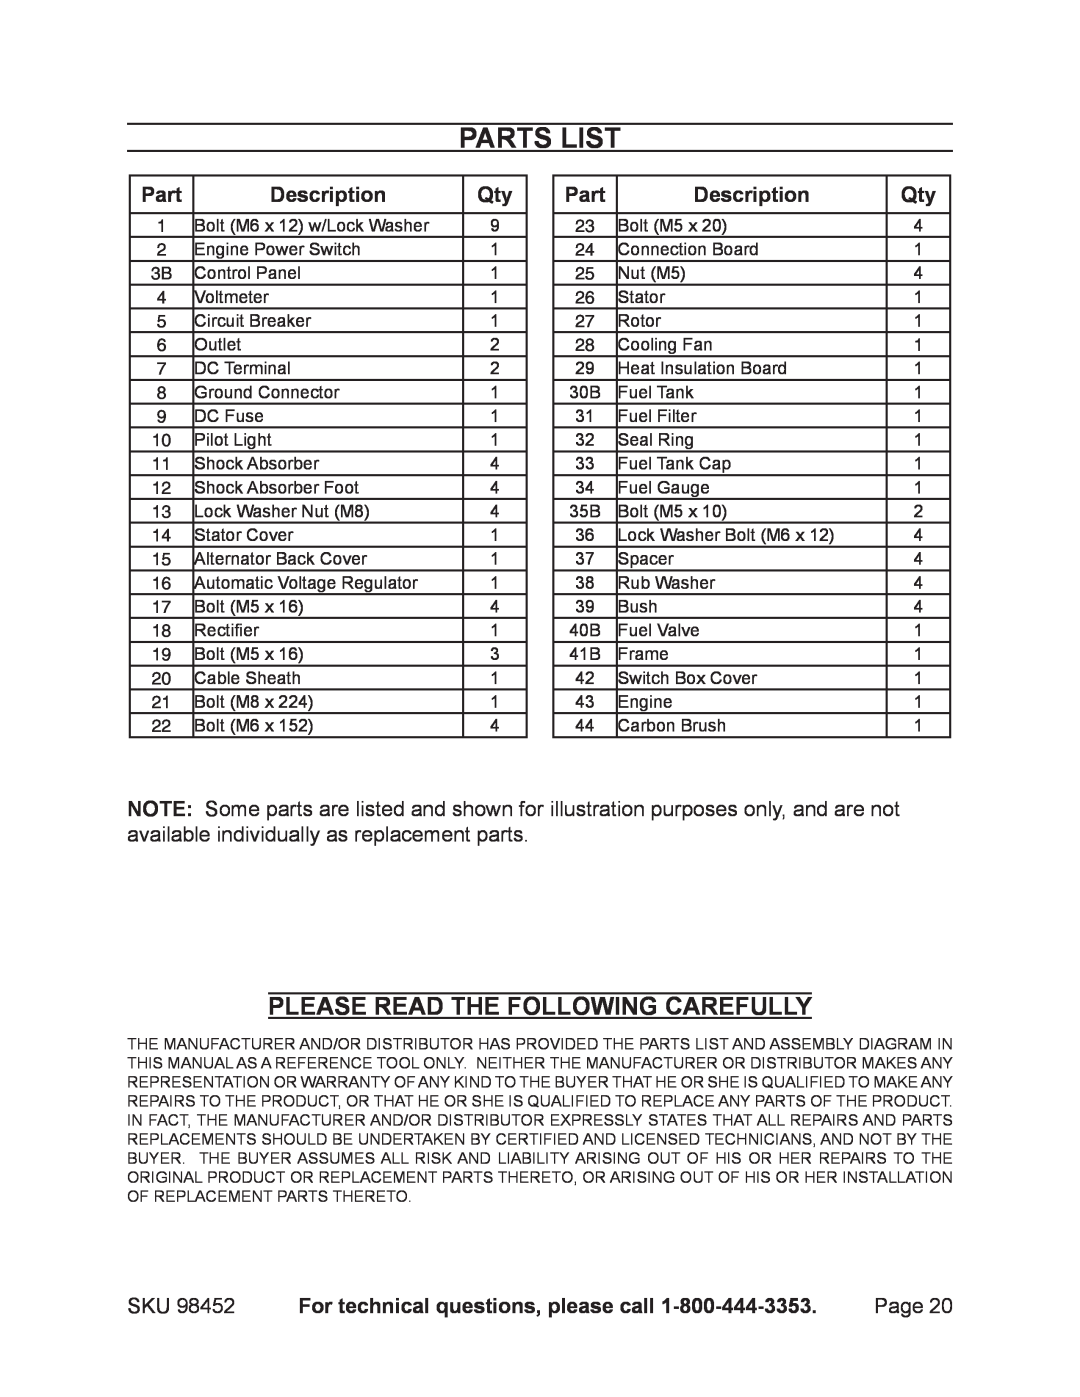 Chicago Electric 98452 Parts List, Please Read The Following Carefully, Description, For technical questions, please call 